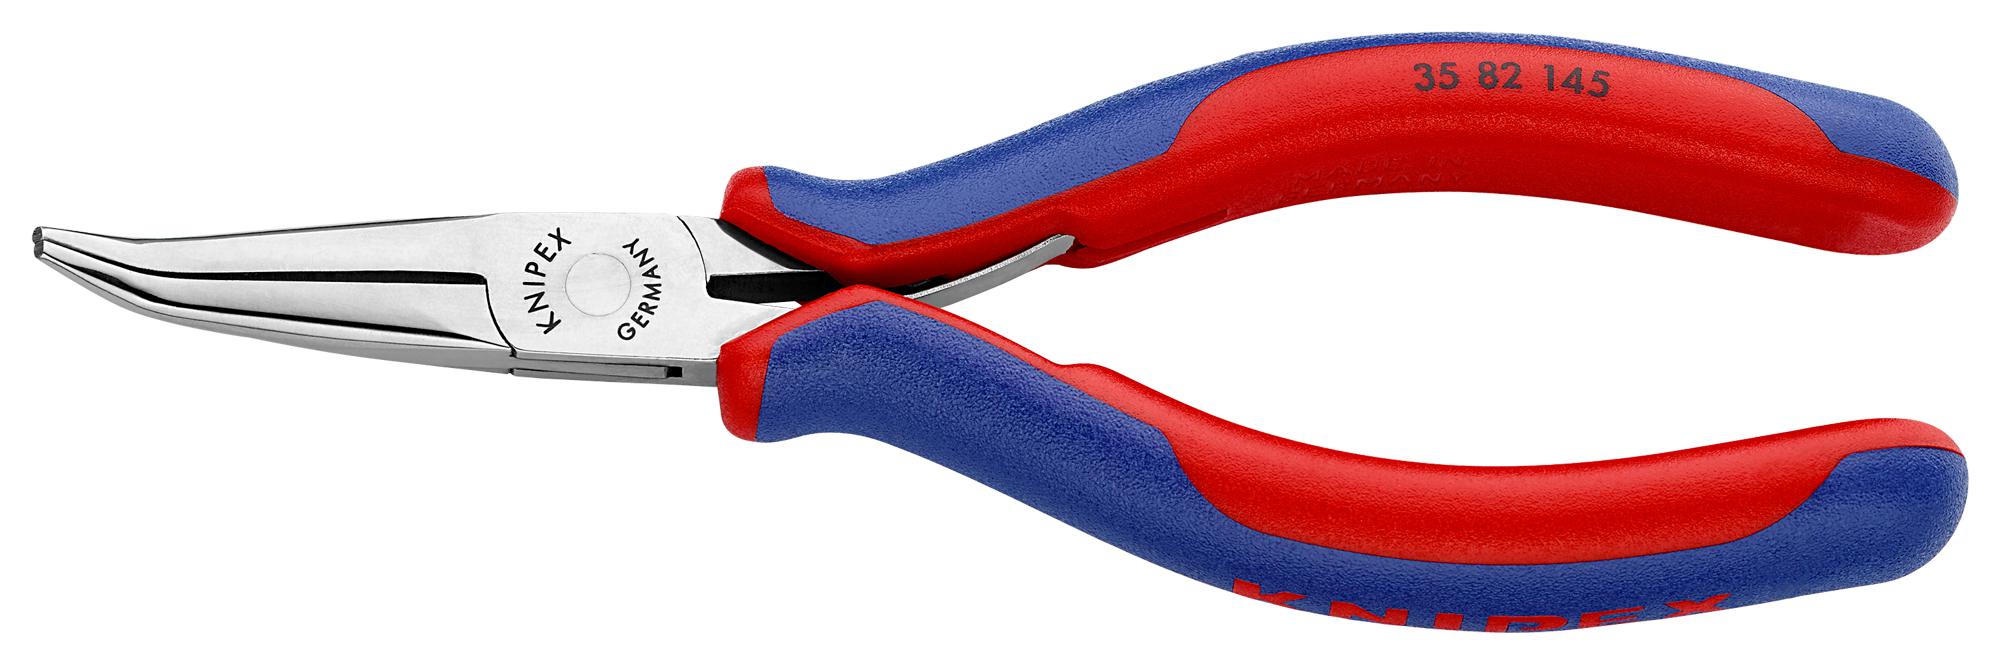 35 82 145 RELAY ADJUSTING PLIERS KNIPEX